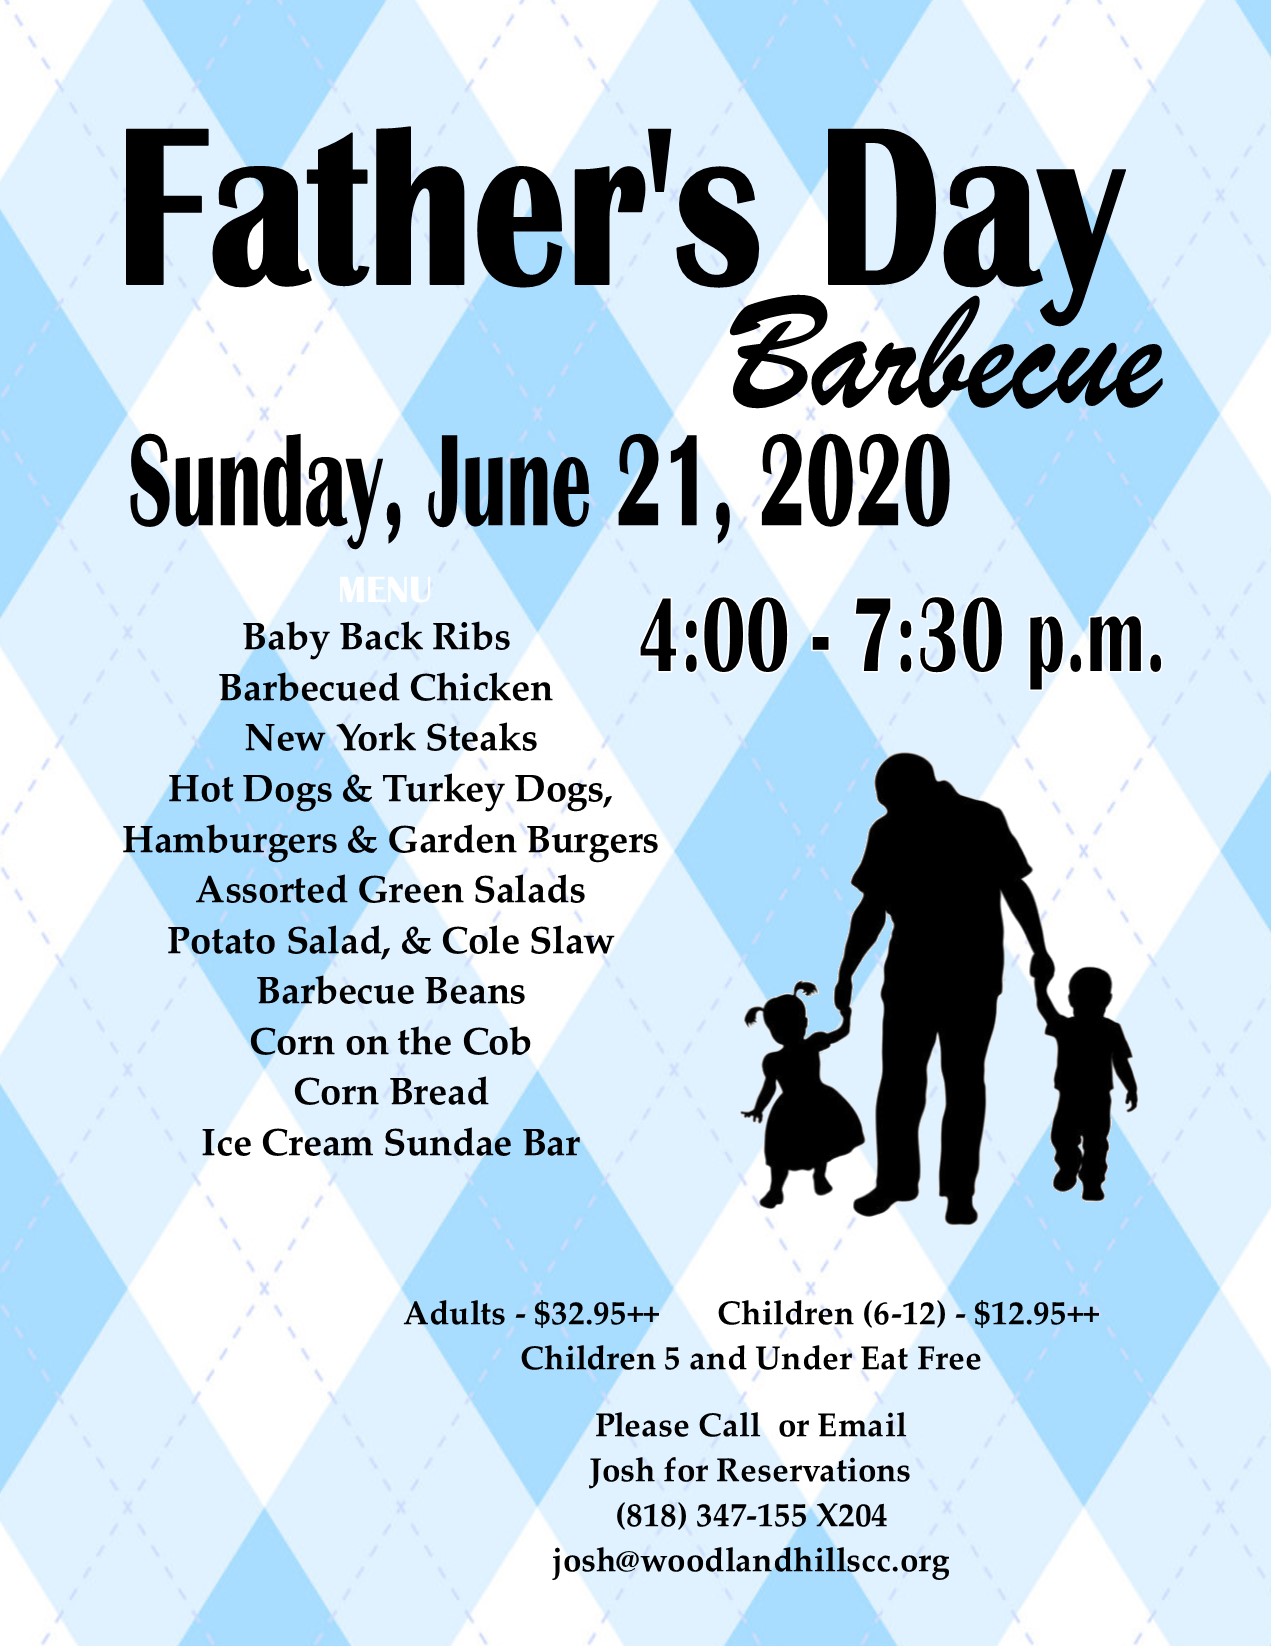 Woodland Hills Country Club Calendar Event FATHERS DAY